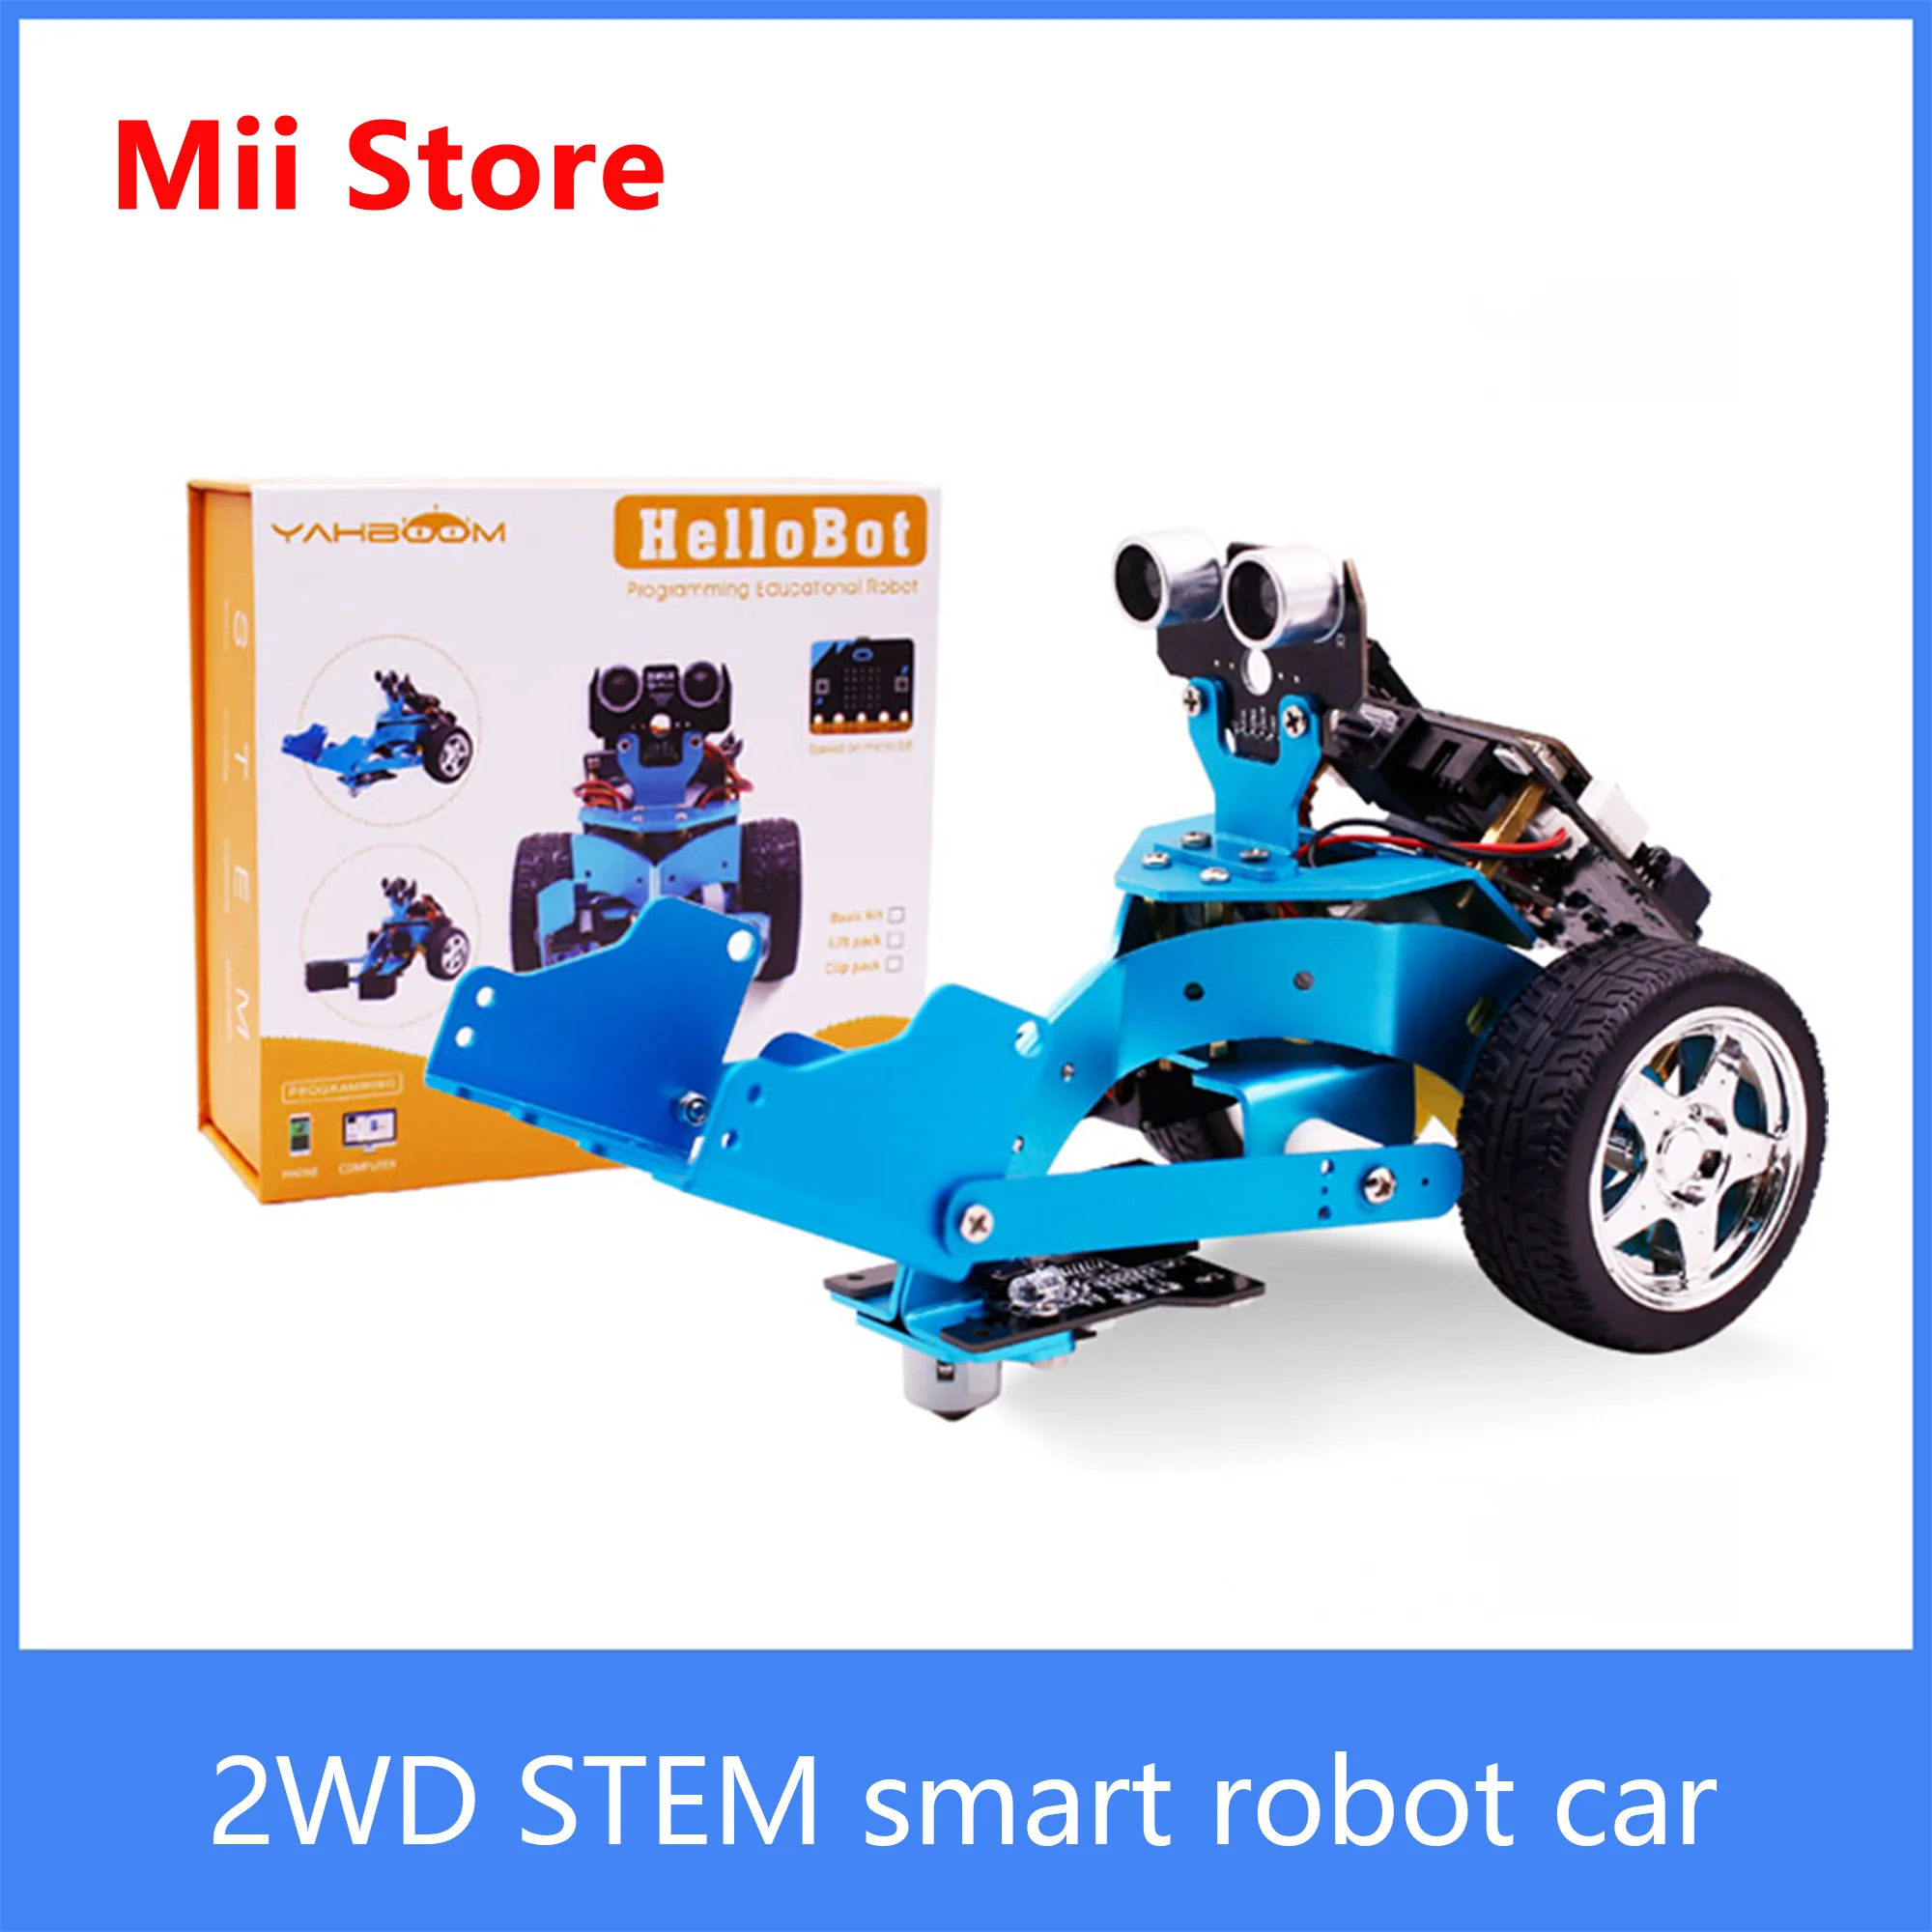 Yahboom Hellobot 2WD STEM Education blue aluminum microbit smart robot car for BBC microbit V2 compitable with microbit V1.5